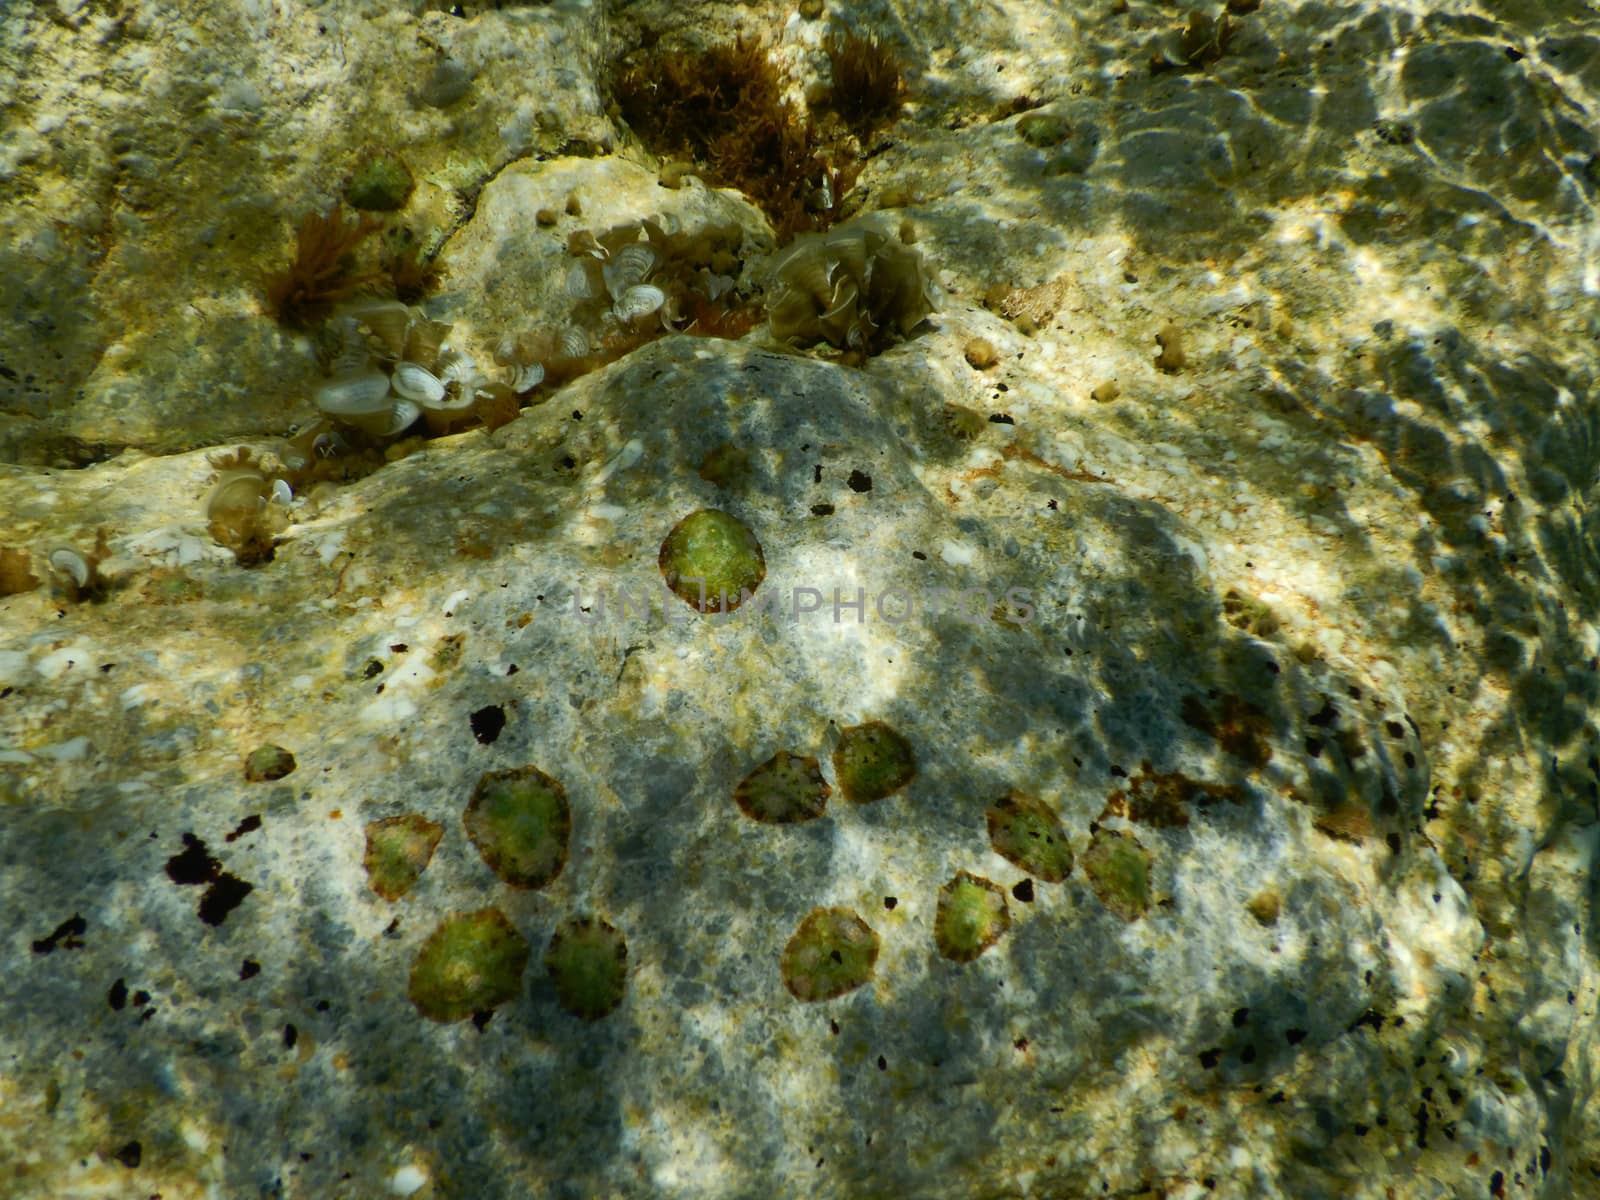 Some limpets on a rocks in Noli, Liguria - Italy